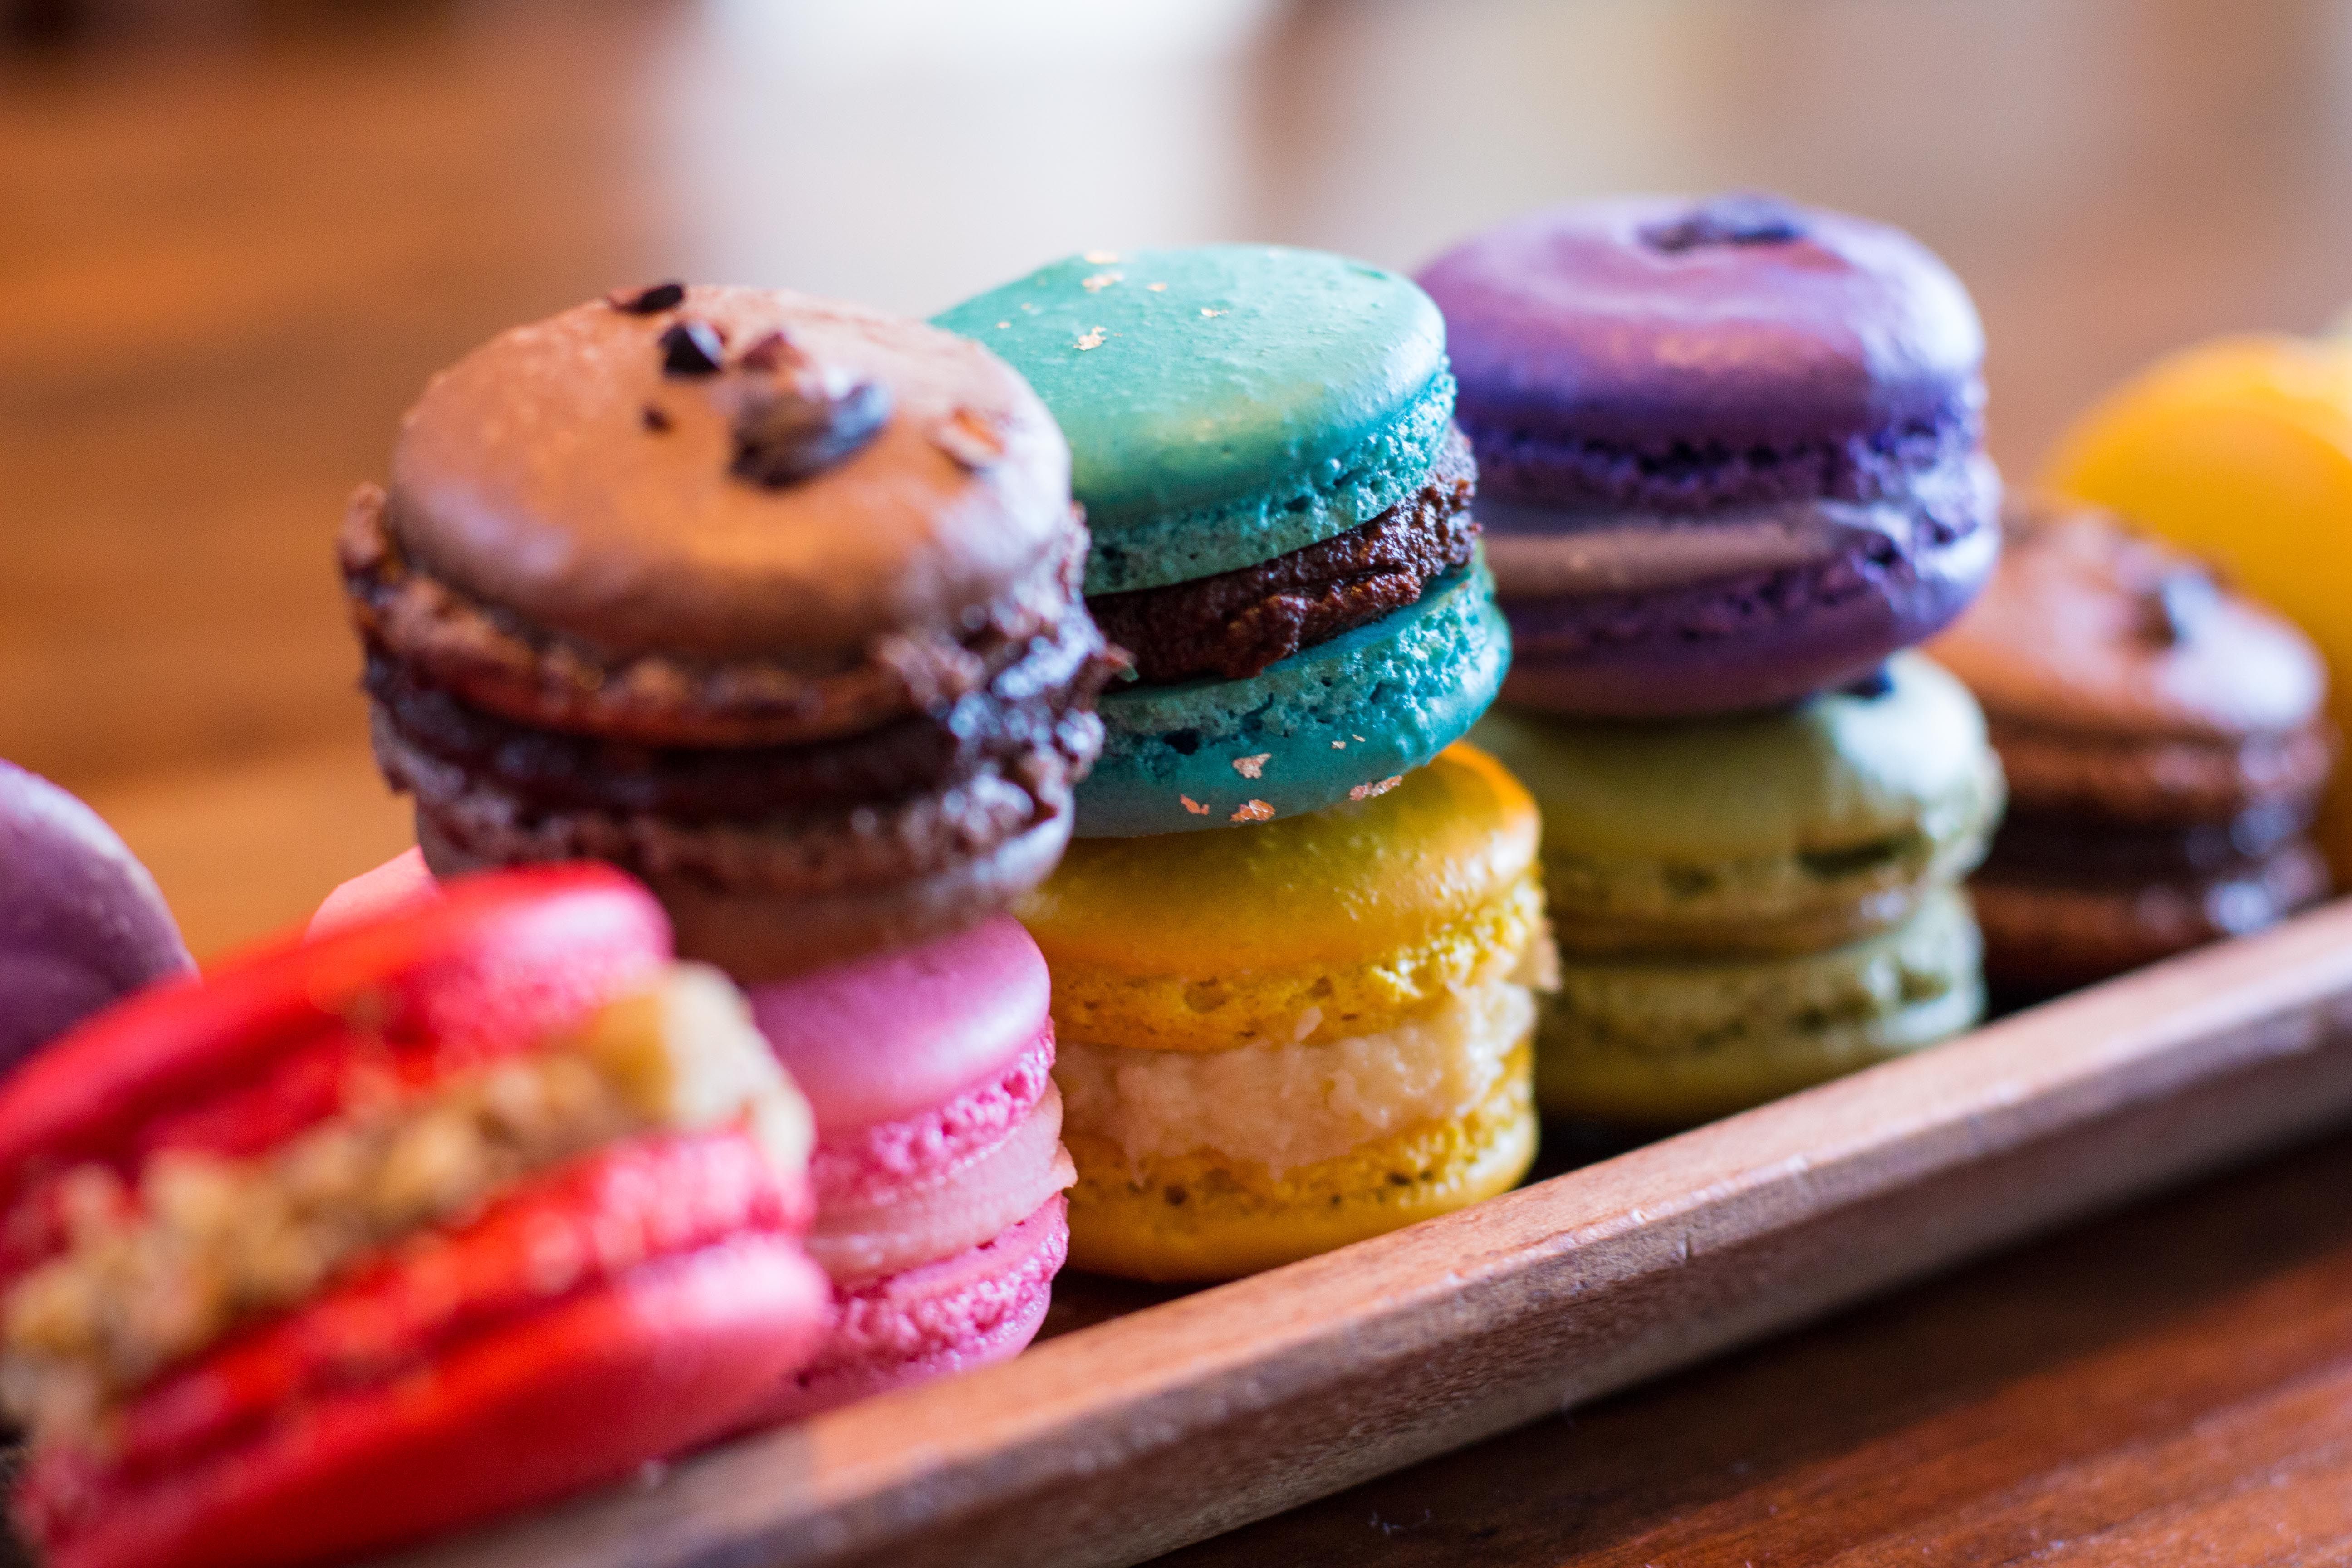 Wallpaper dessert macaroons download this wallpaper for free in HD